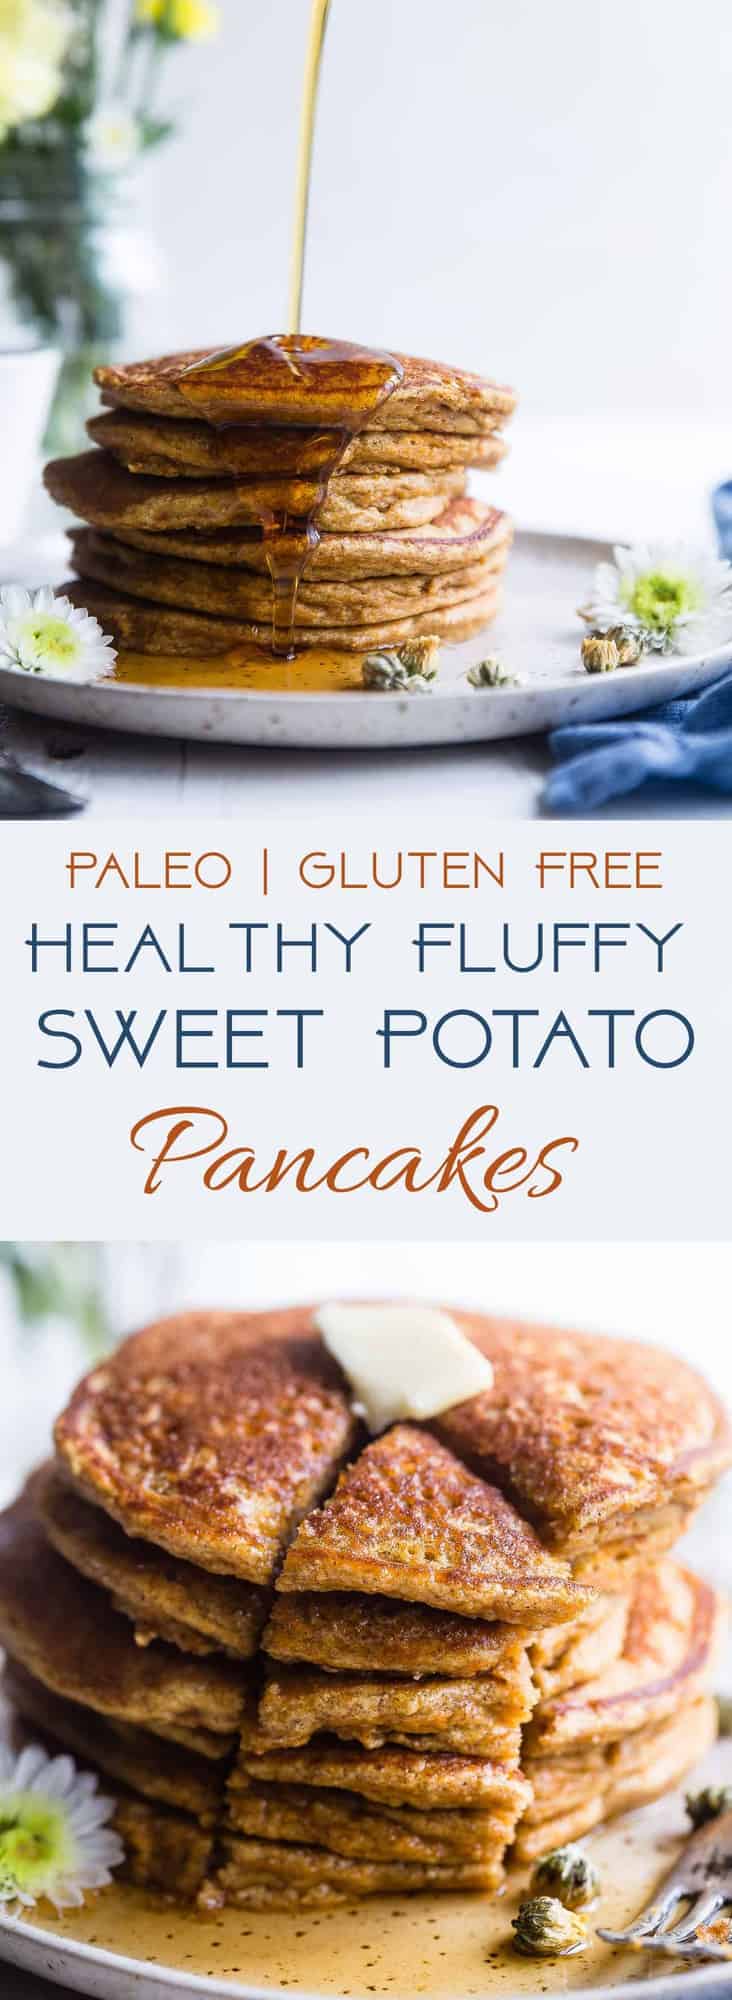 Gluten Free Paleo Sweet Potato Pancakes - SO fluffy and tender that you won't believe they're made without butter or oil! Perfect for a healthy breakfast and freezes great for busy mornings! | #Foodfaithfitness | #Glutenfree #Paleo #Healthy #Dairyfree #Pancakes